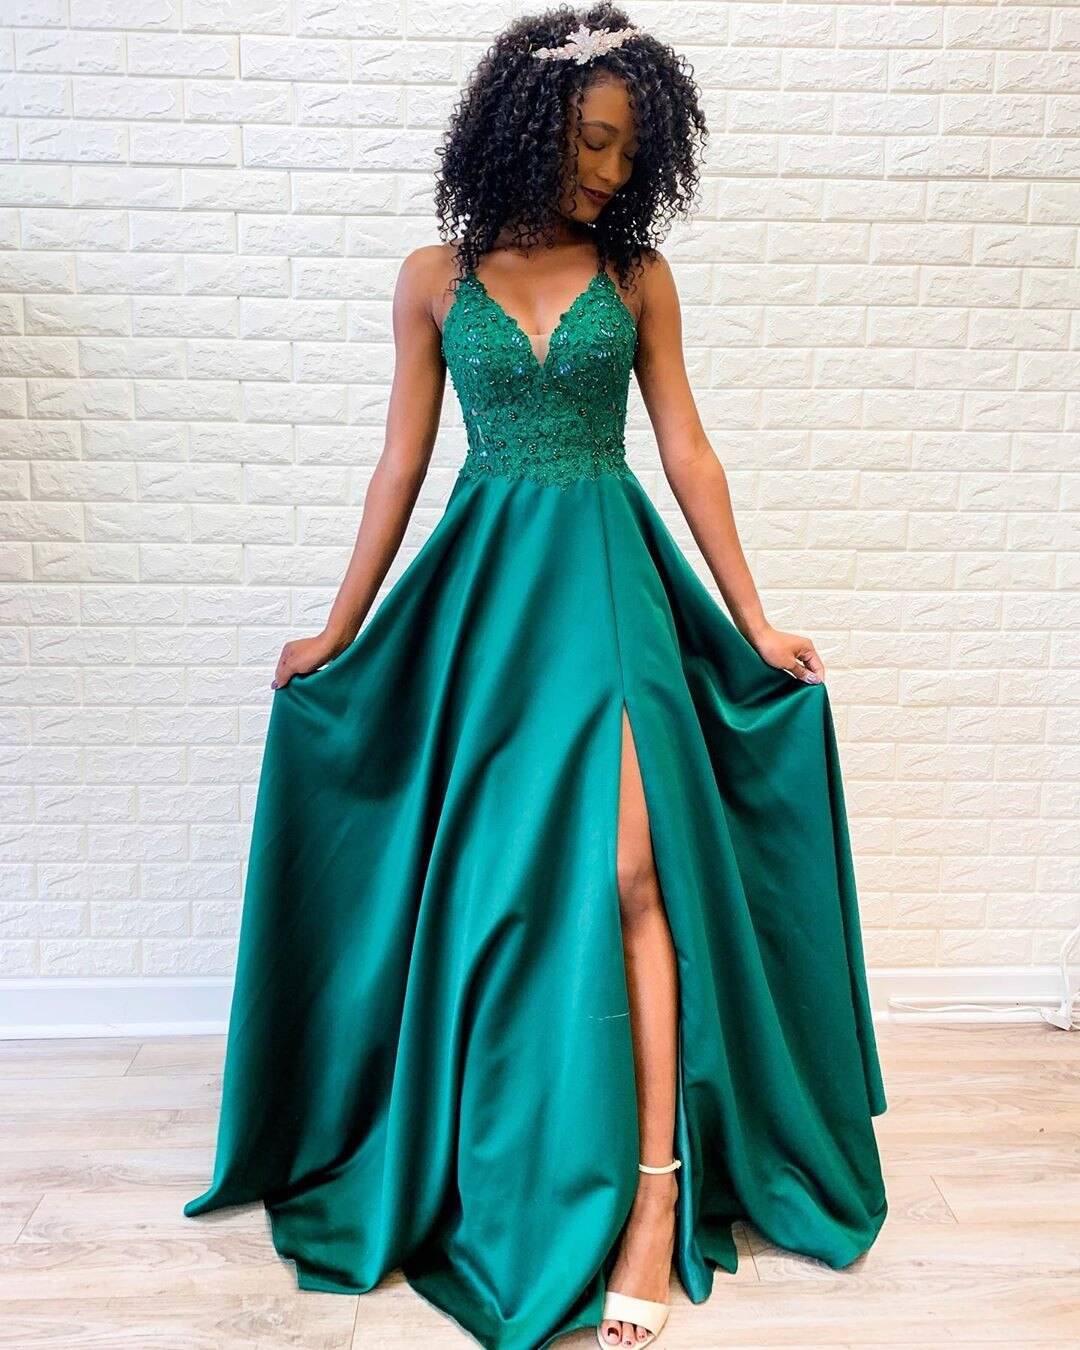 Prom Princss Sleveless Dress Aussieprom: online-only Formal & Bridesmaid Color : Sea Green|Black|Blue|Gray|Green|Pink|Purple|Red|White|Yellow|Champagne 